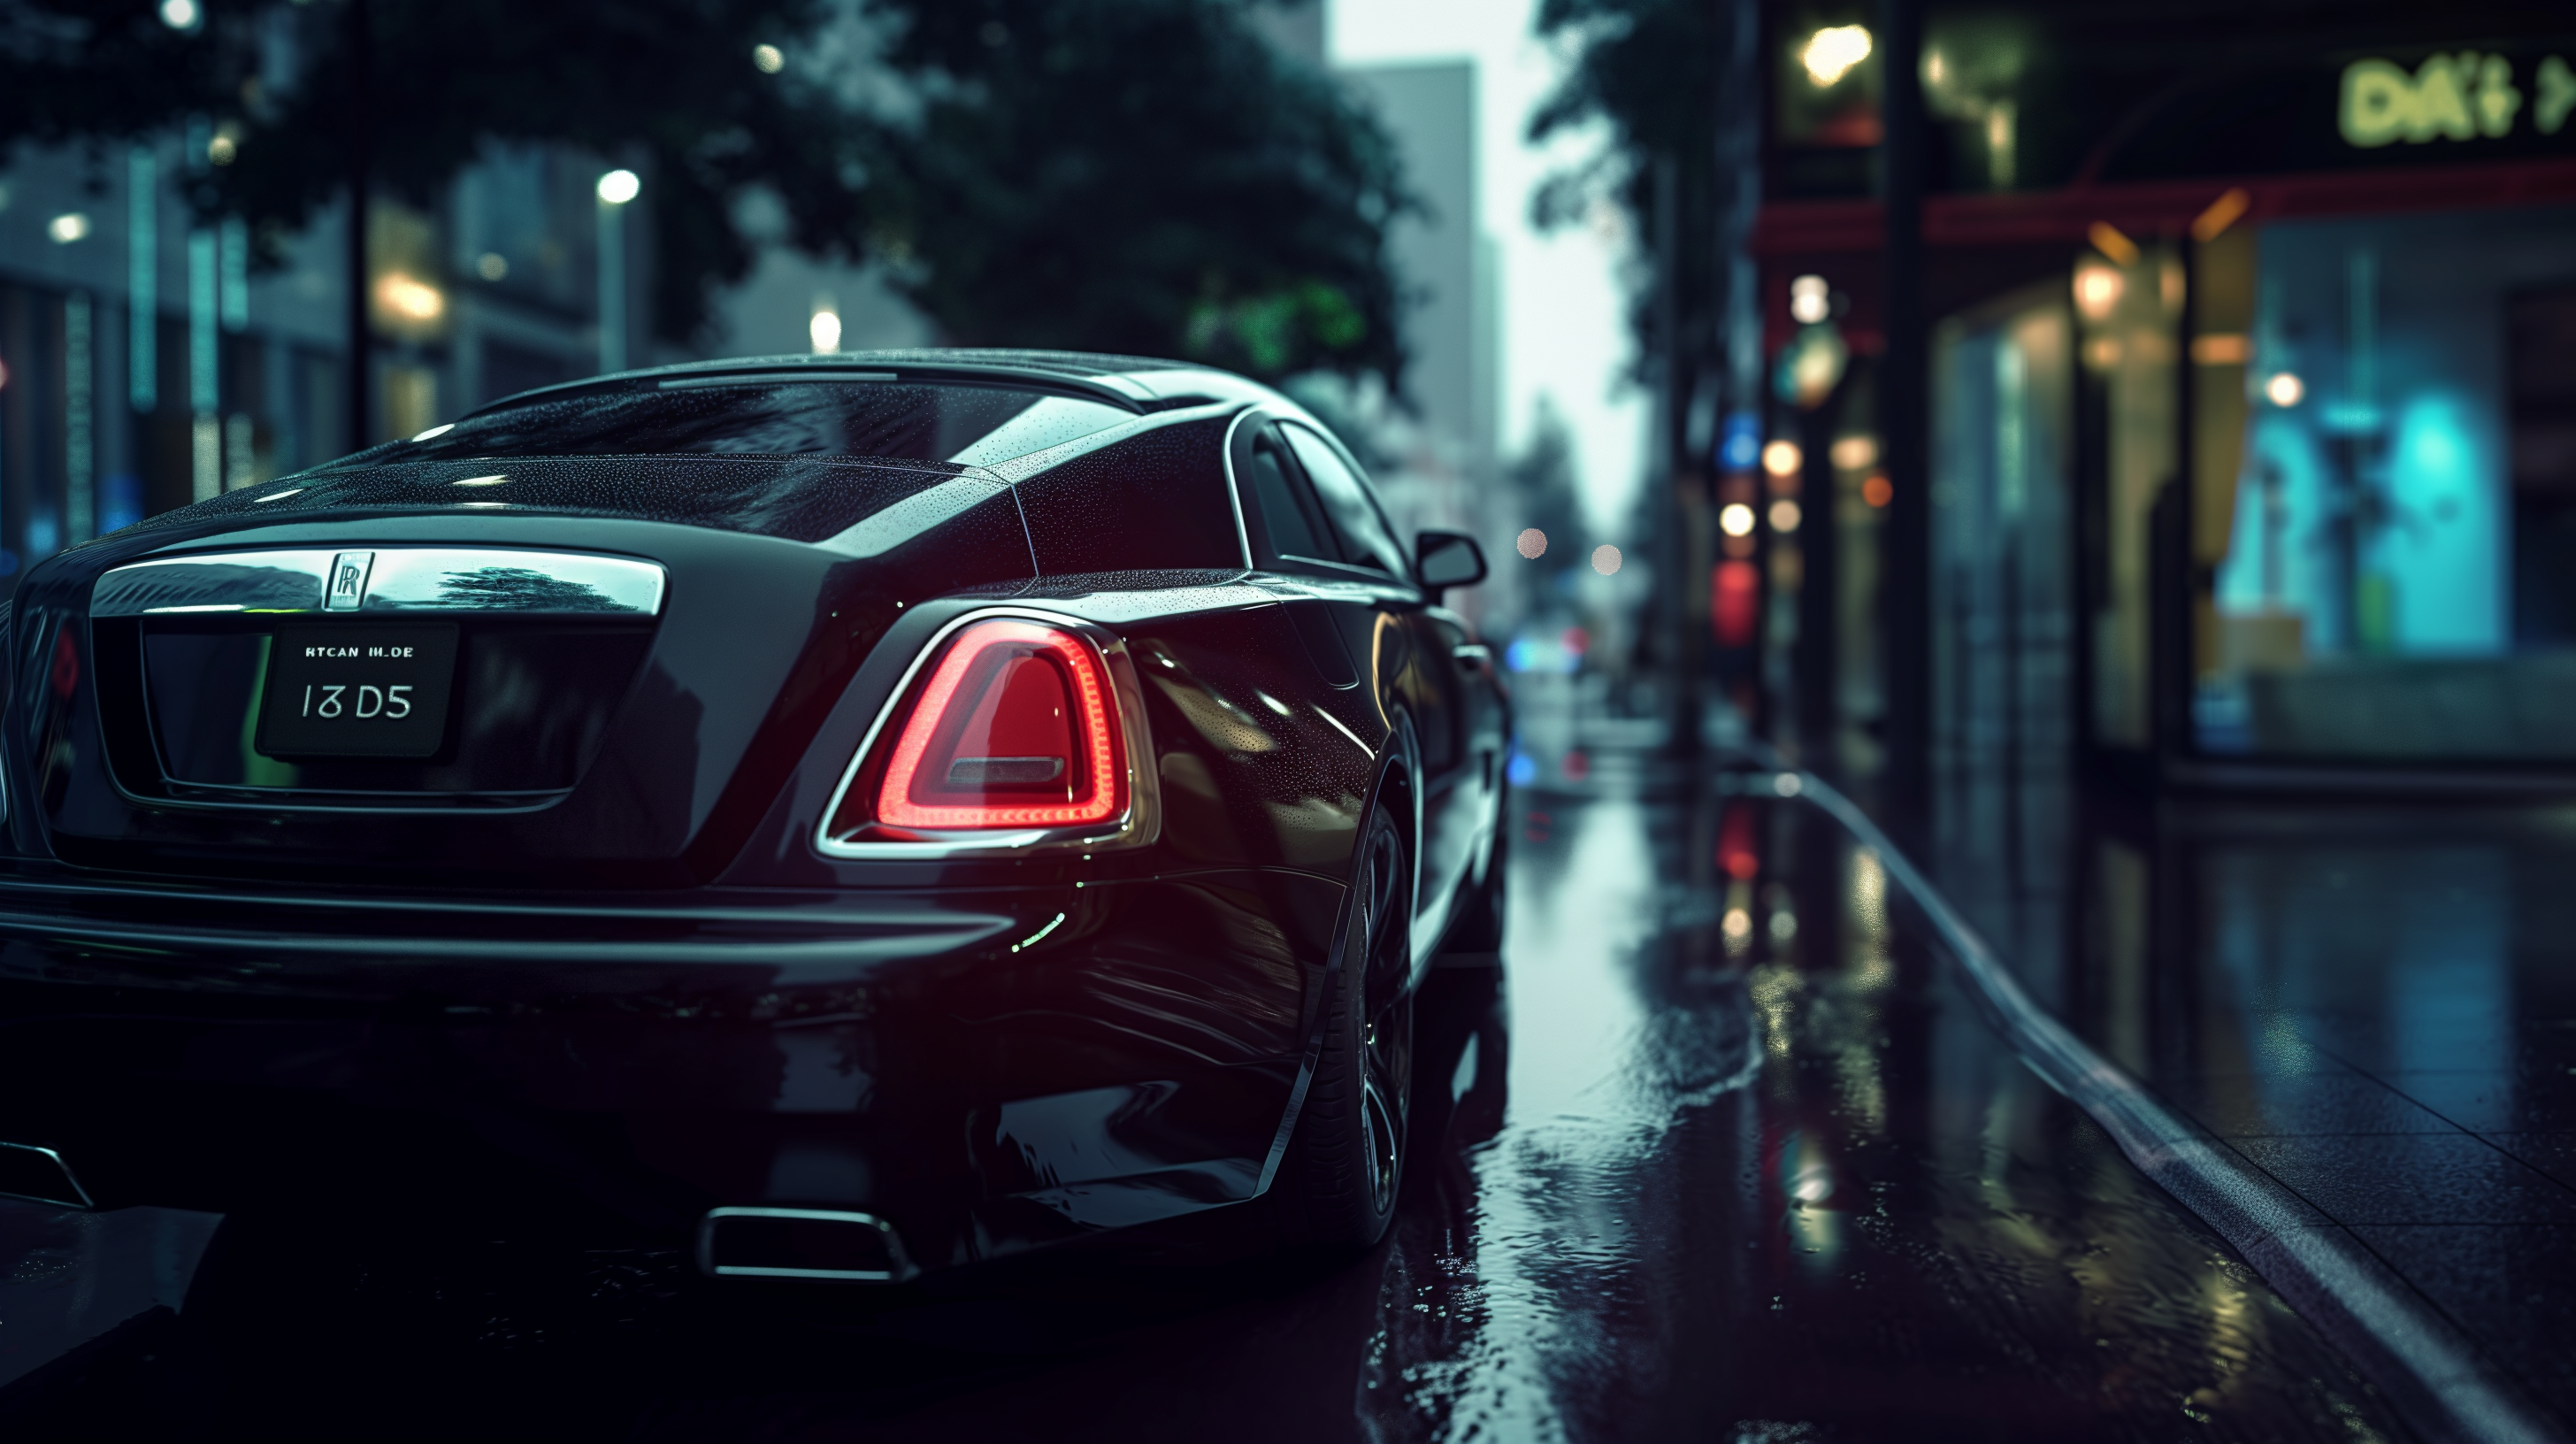 General 2912x1632 car Rolls Royce Wraith AI art cyberpunk rear view taillights vehicle depth of field trees building wet wet road licence plates reflection